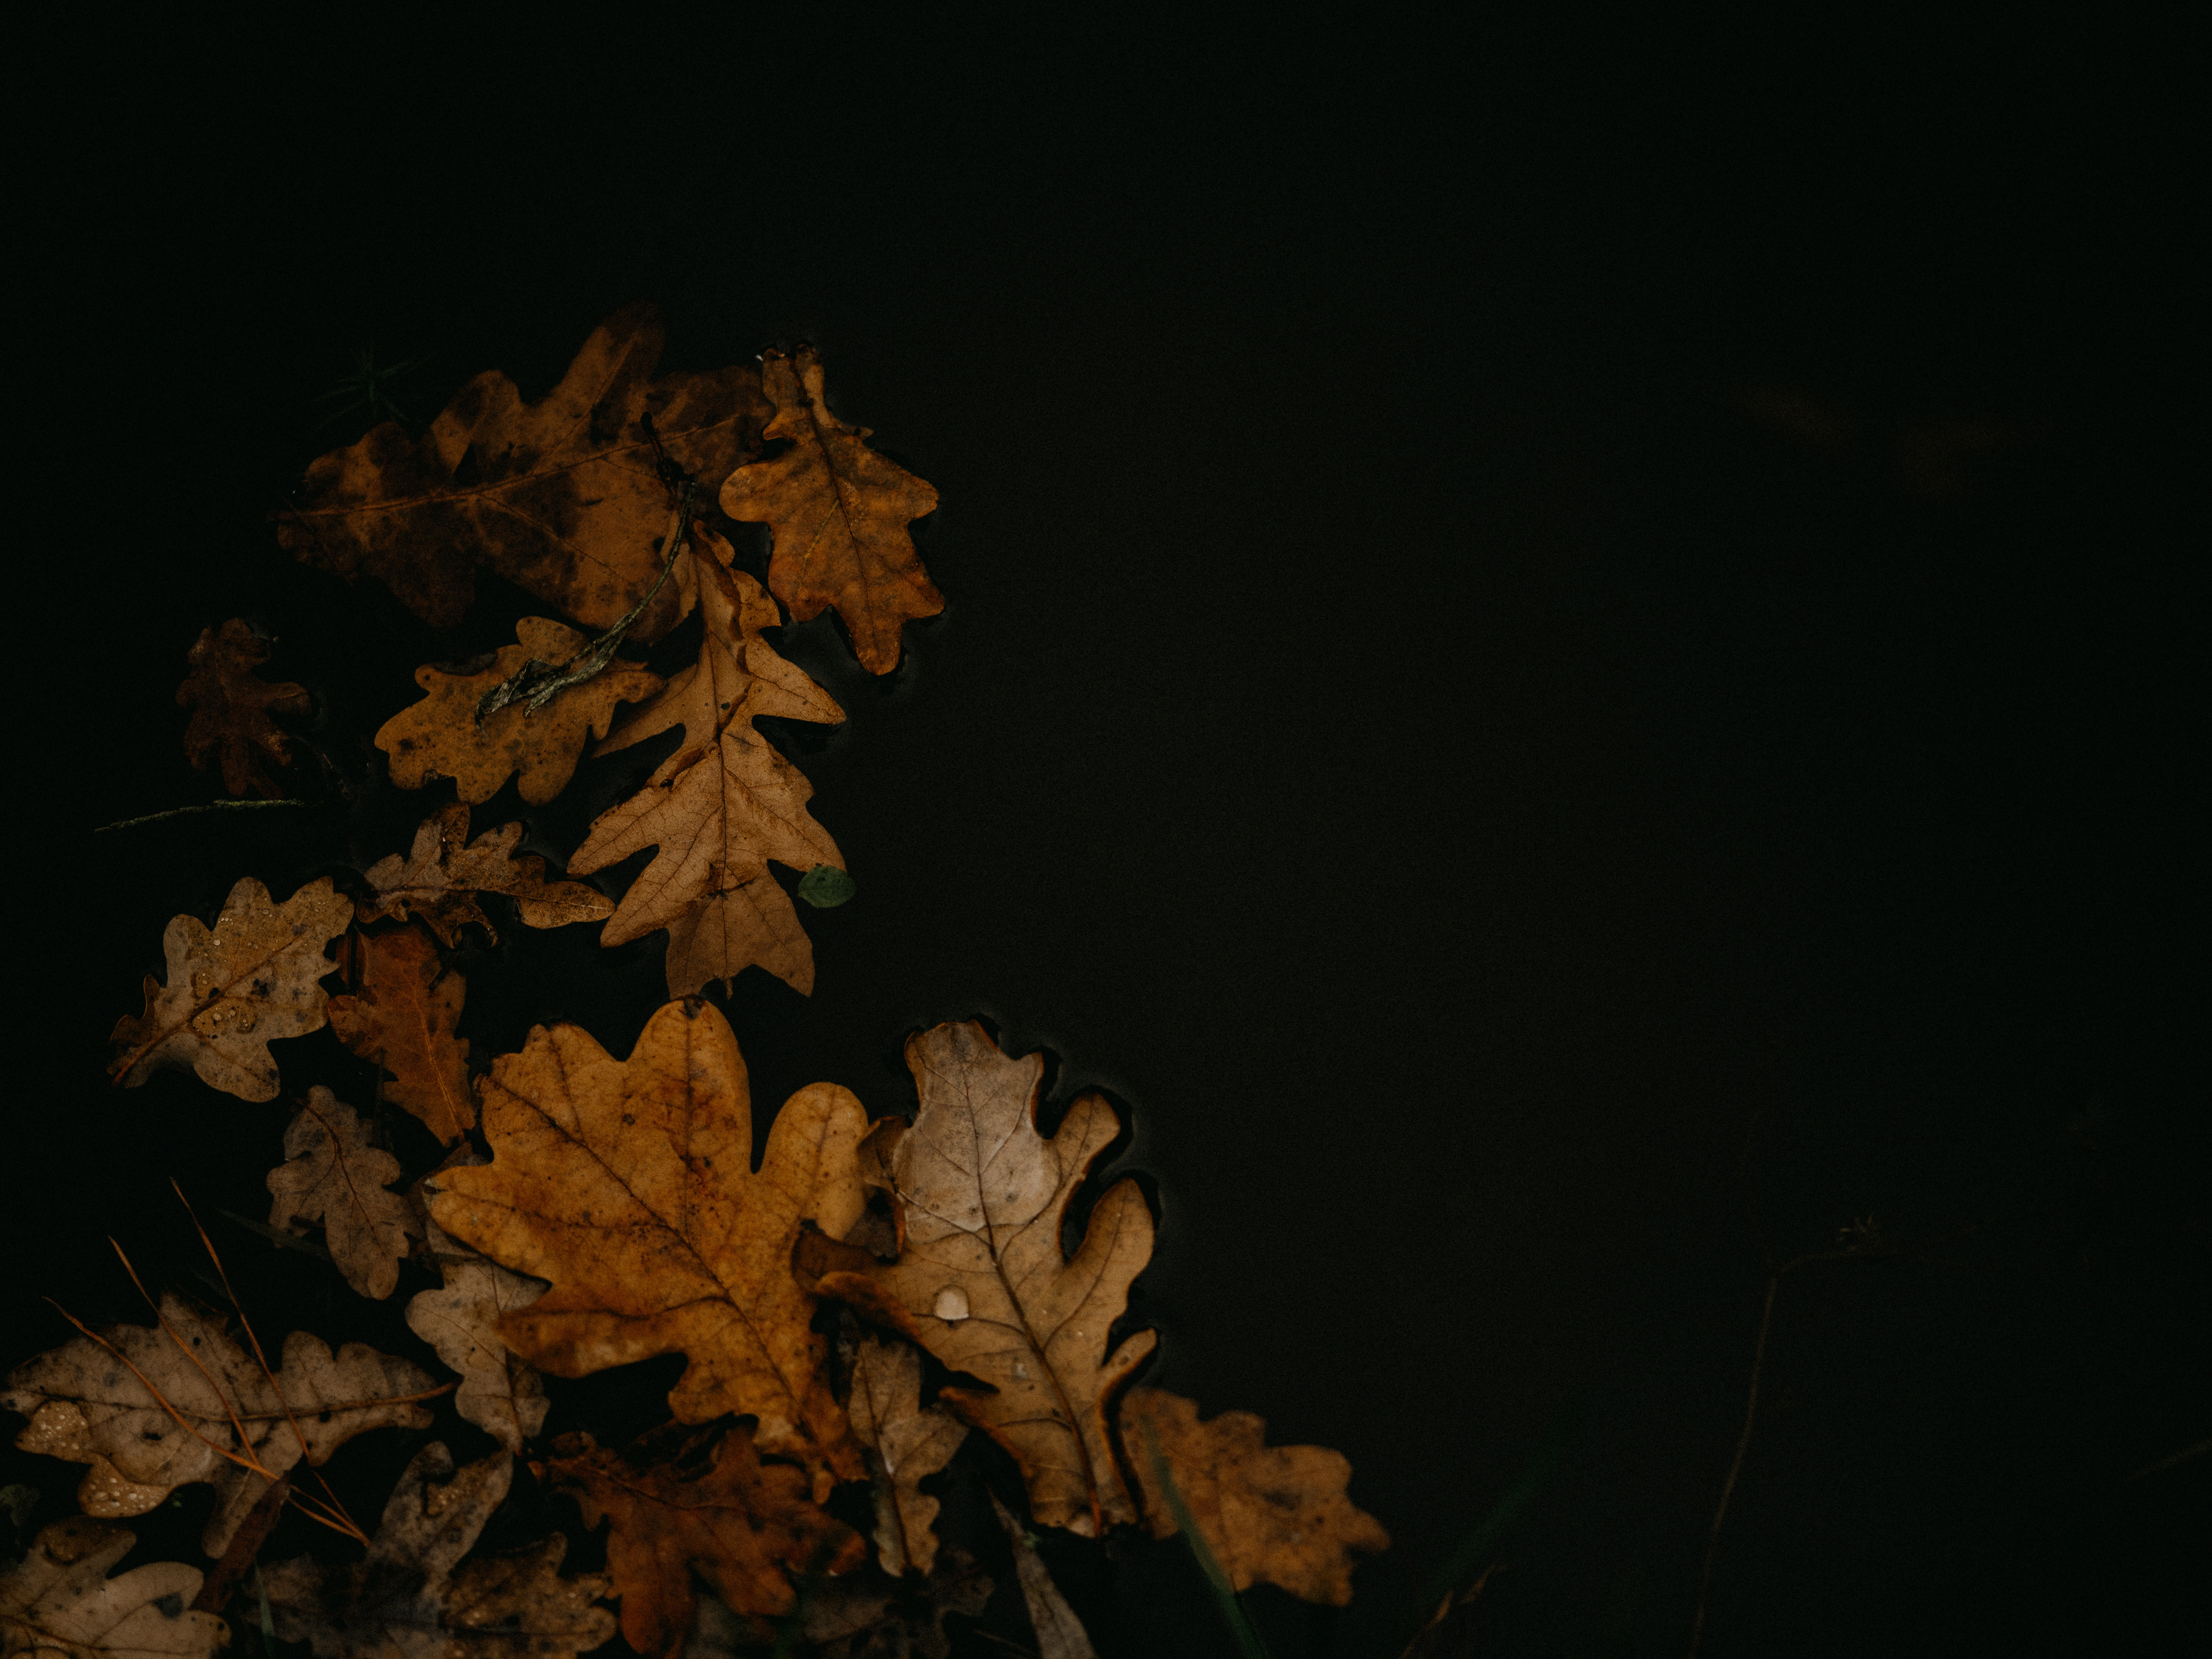 android macro, autumn, leaves, brown, puddle, fallen leaves, fallen foliage